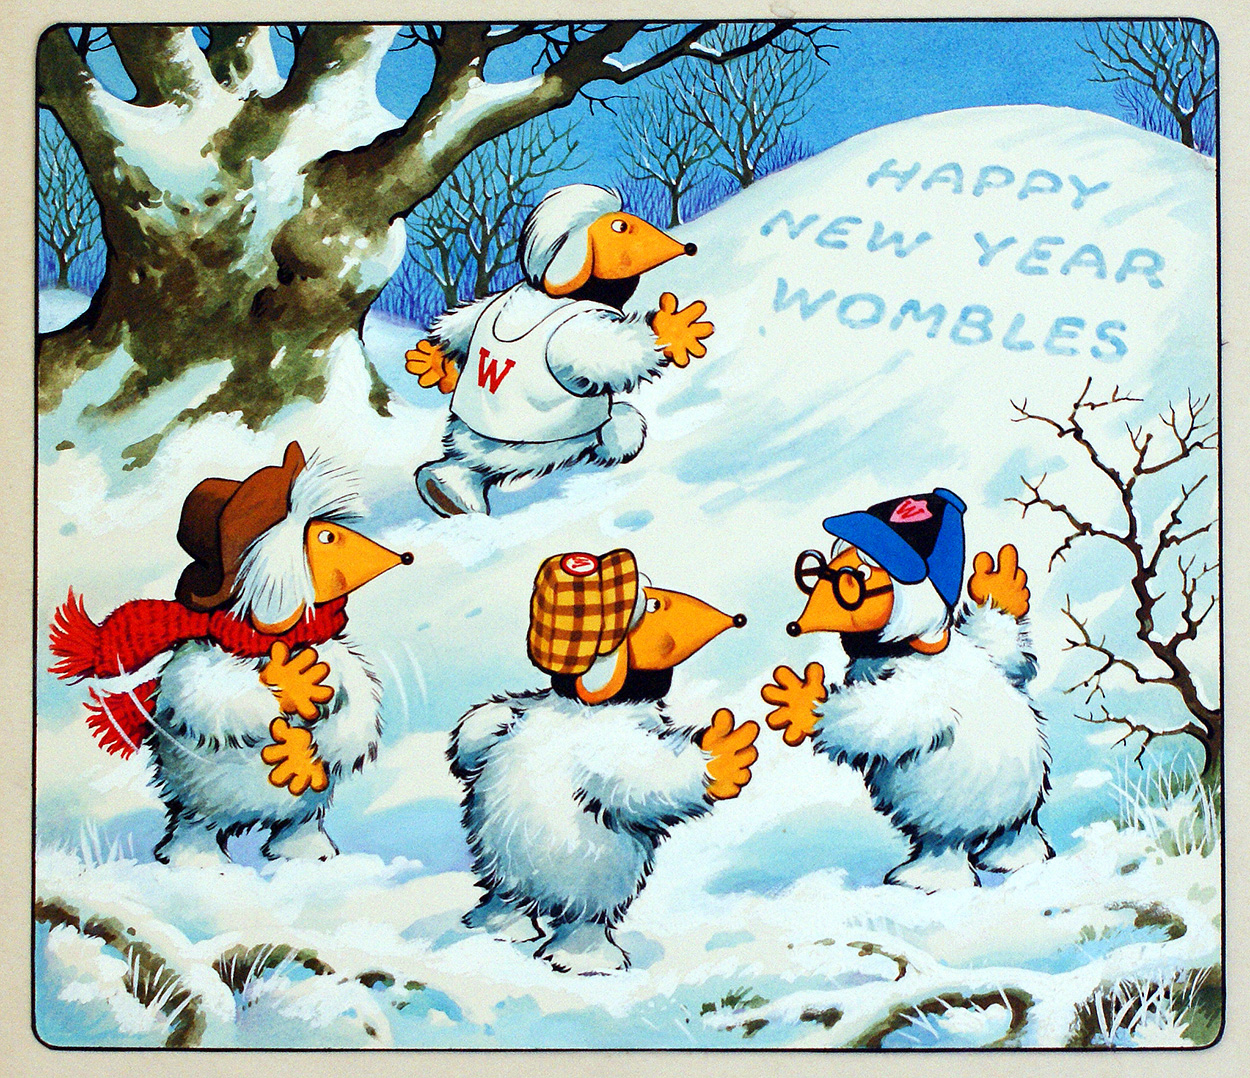 Happy New Year Wombles (Original) art by The Wombles (Blasco) at The Illustration Art Gallery